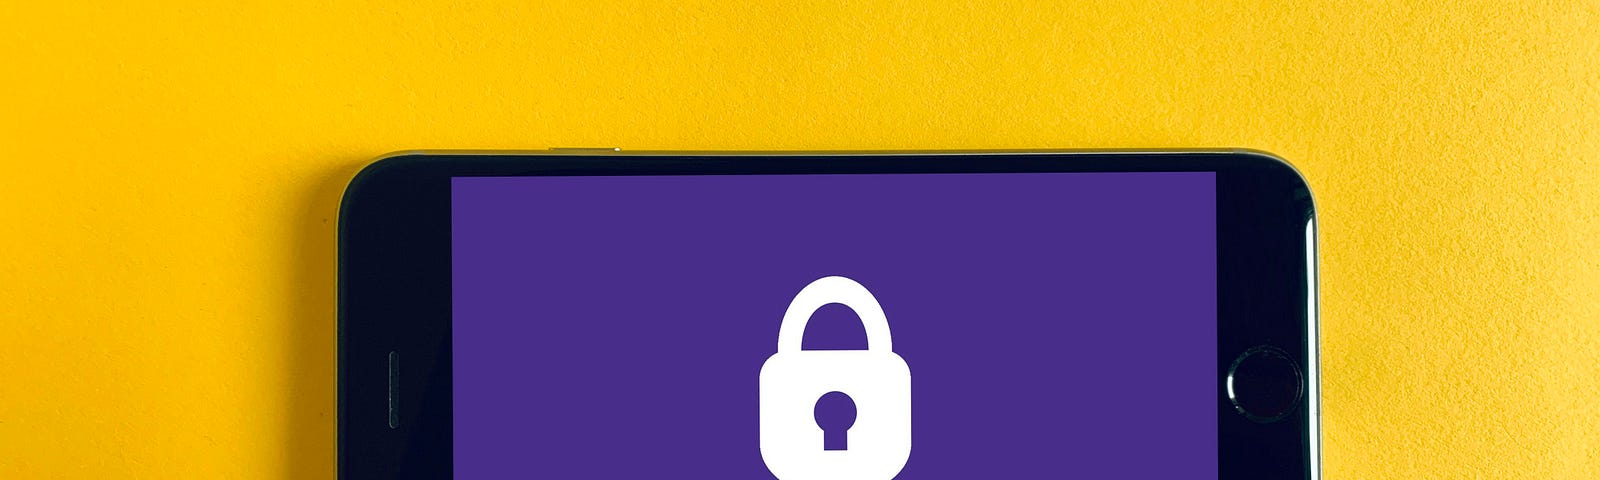 smart phone with an image of a white lock against a purple background